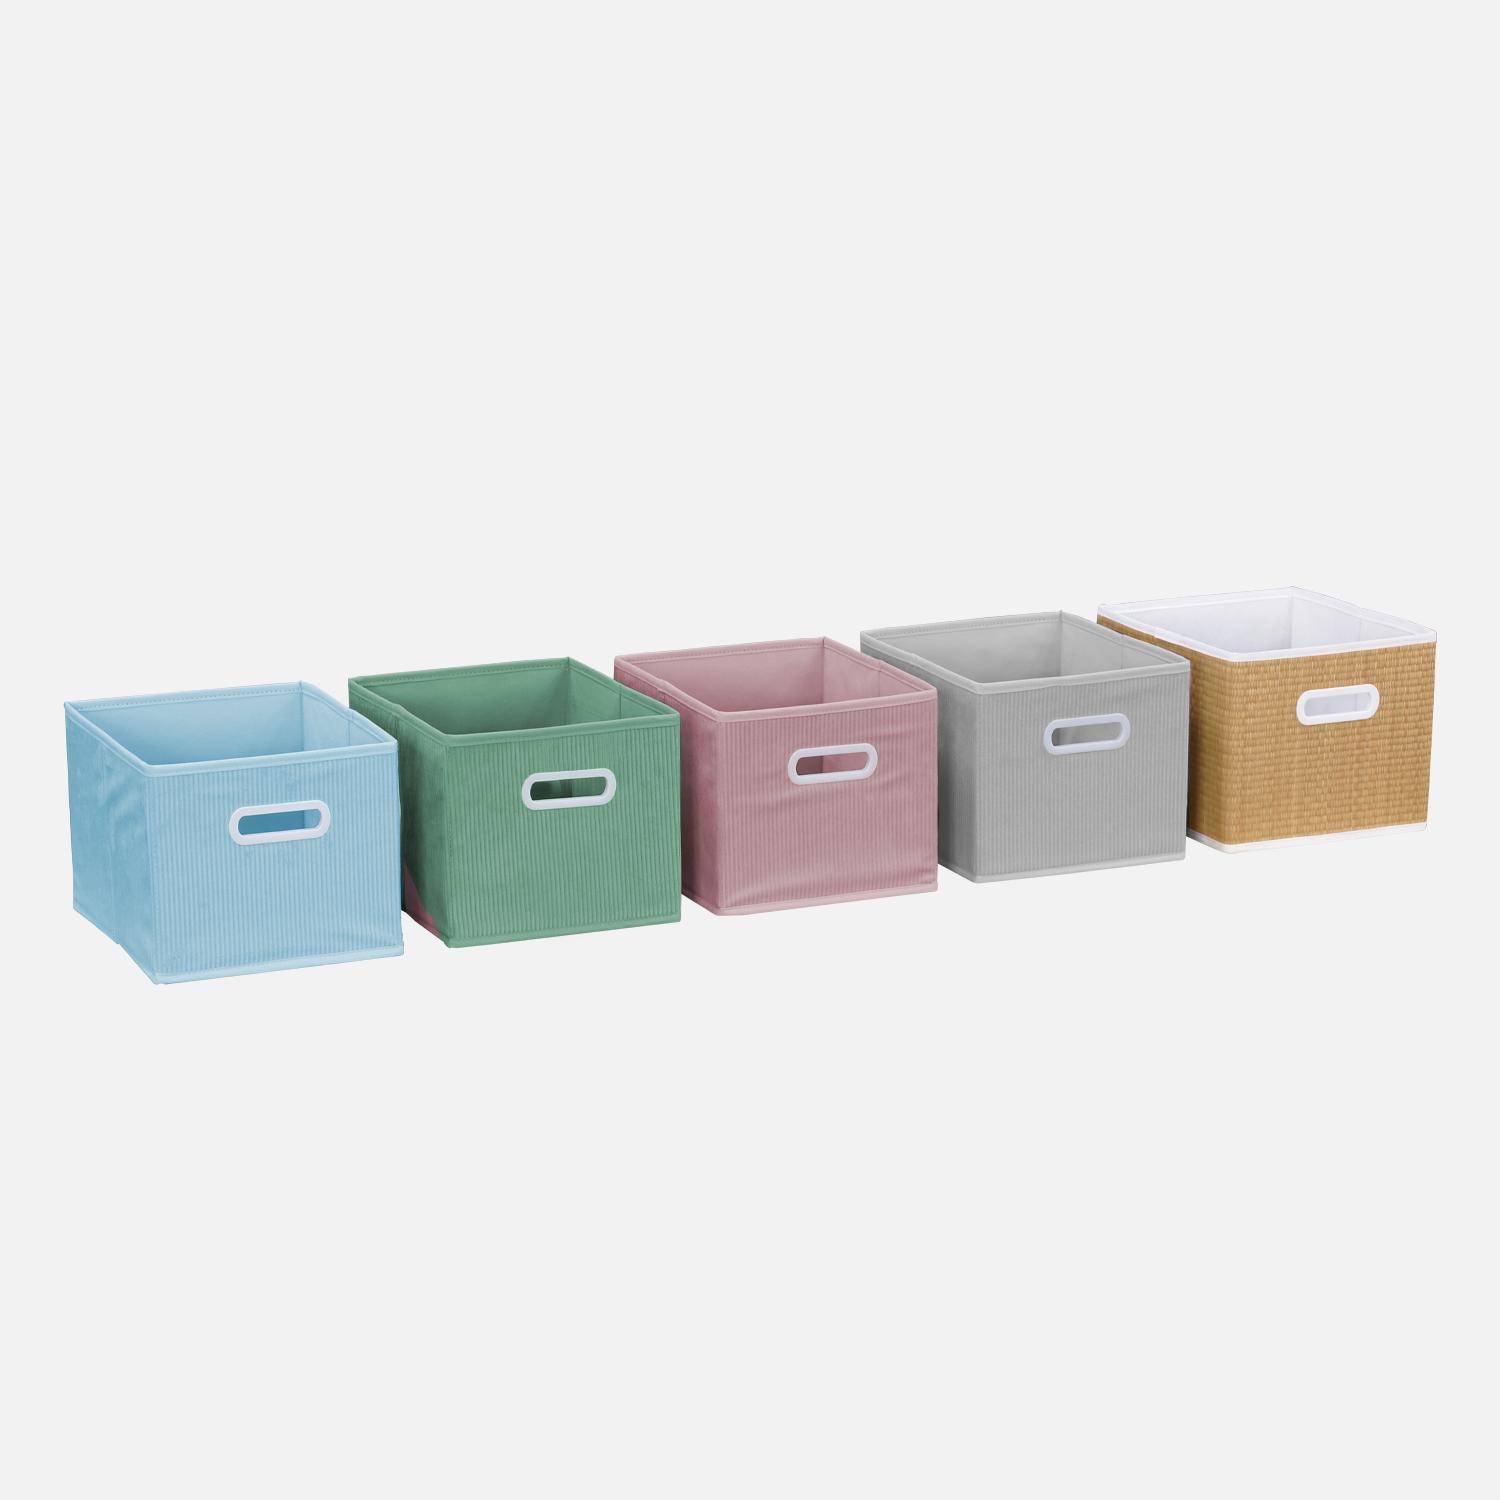 Storage unit for children with 7 compartments and 3 green baskets and 3 grey velvet baskets,sweeek,Photo4